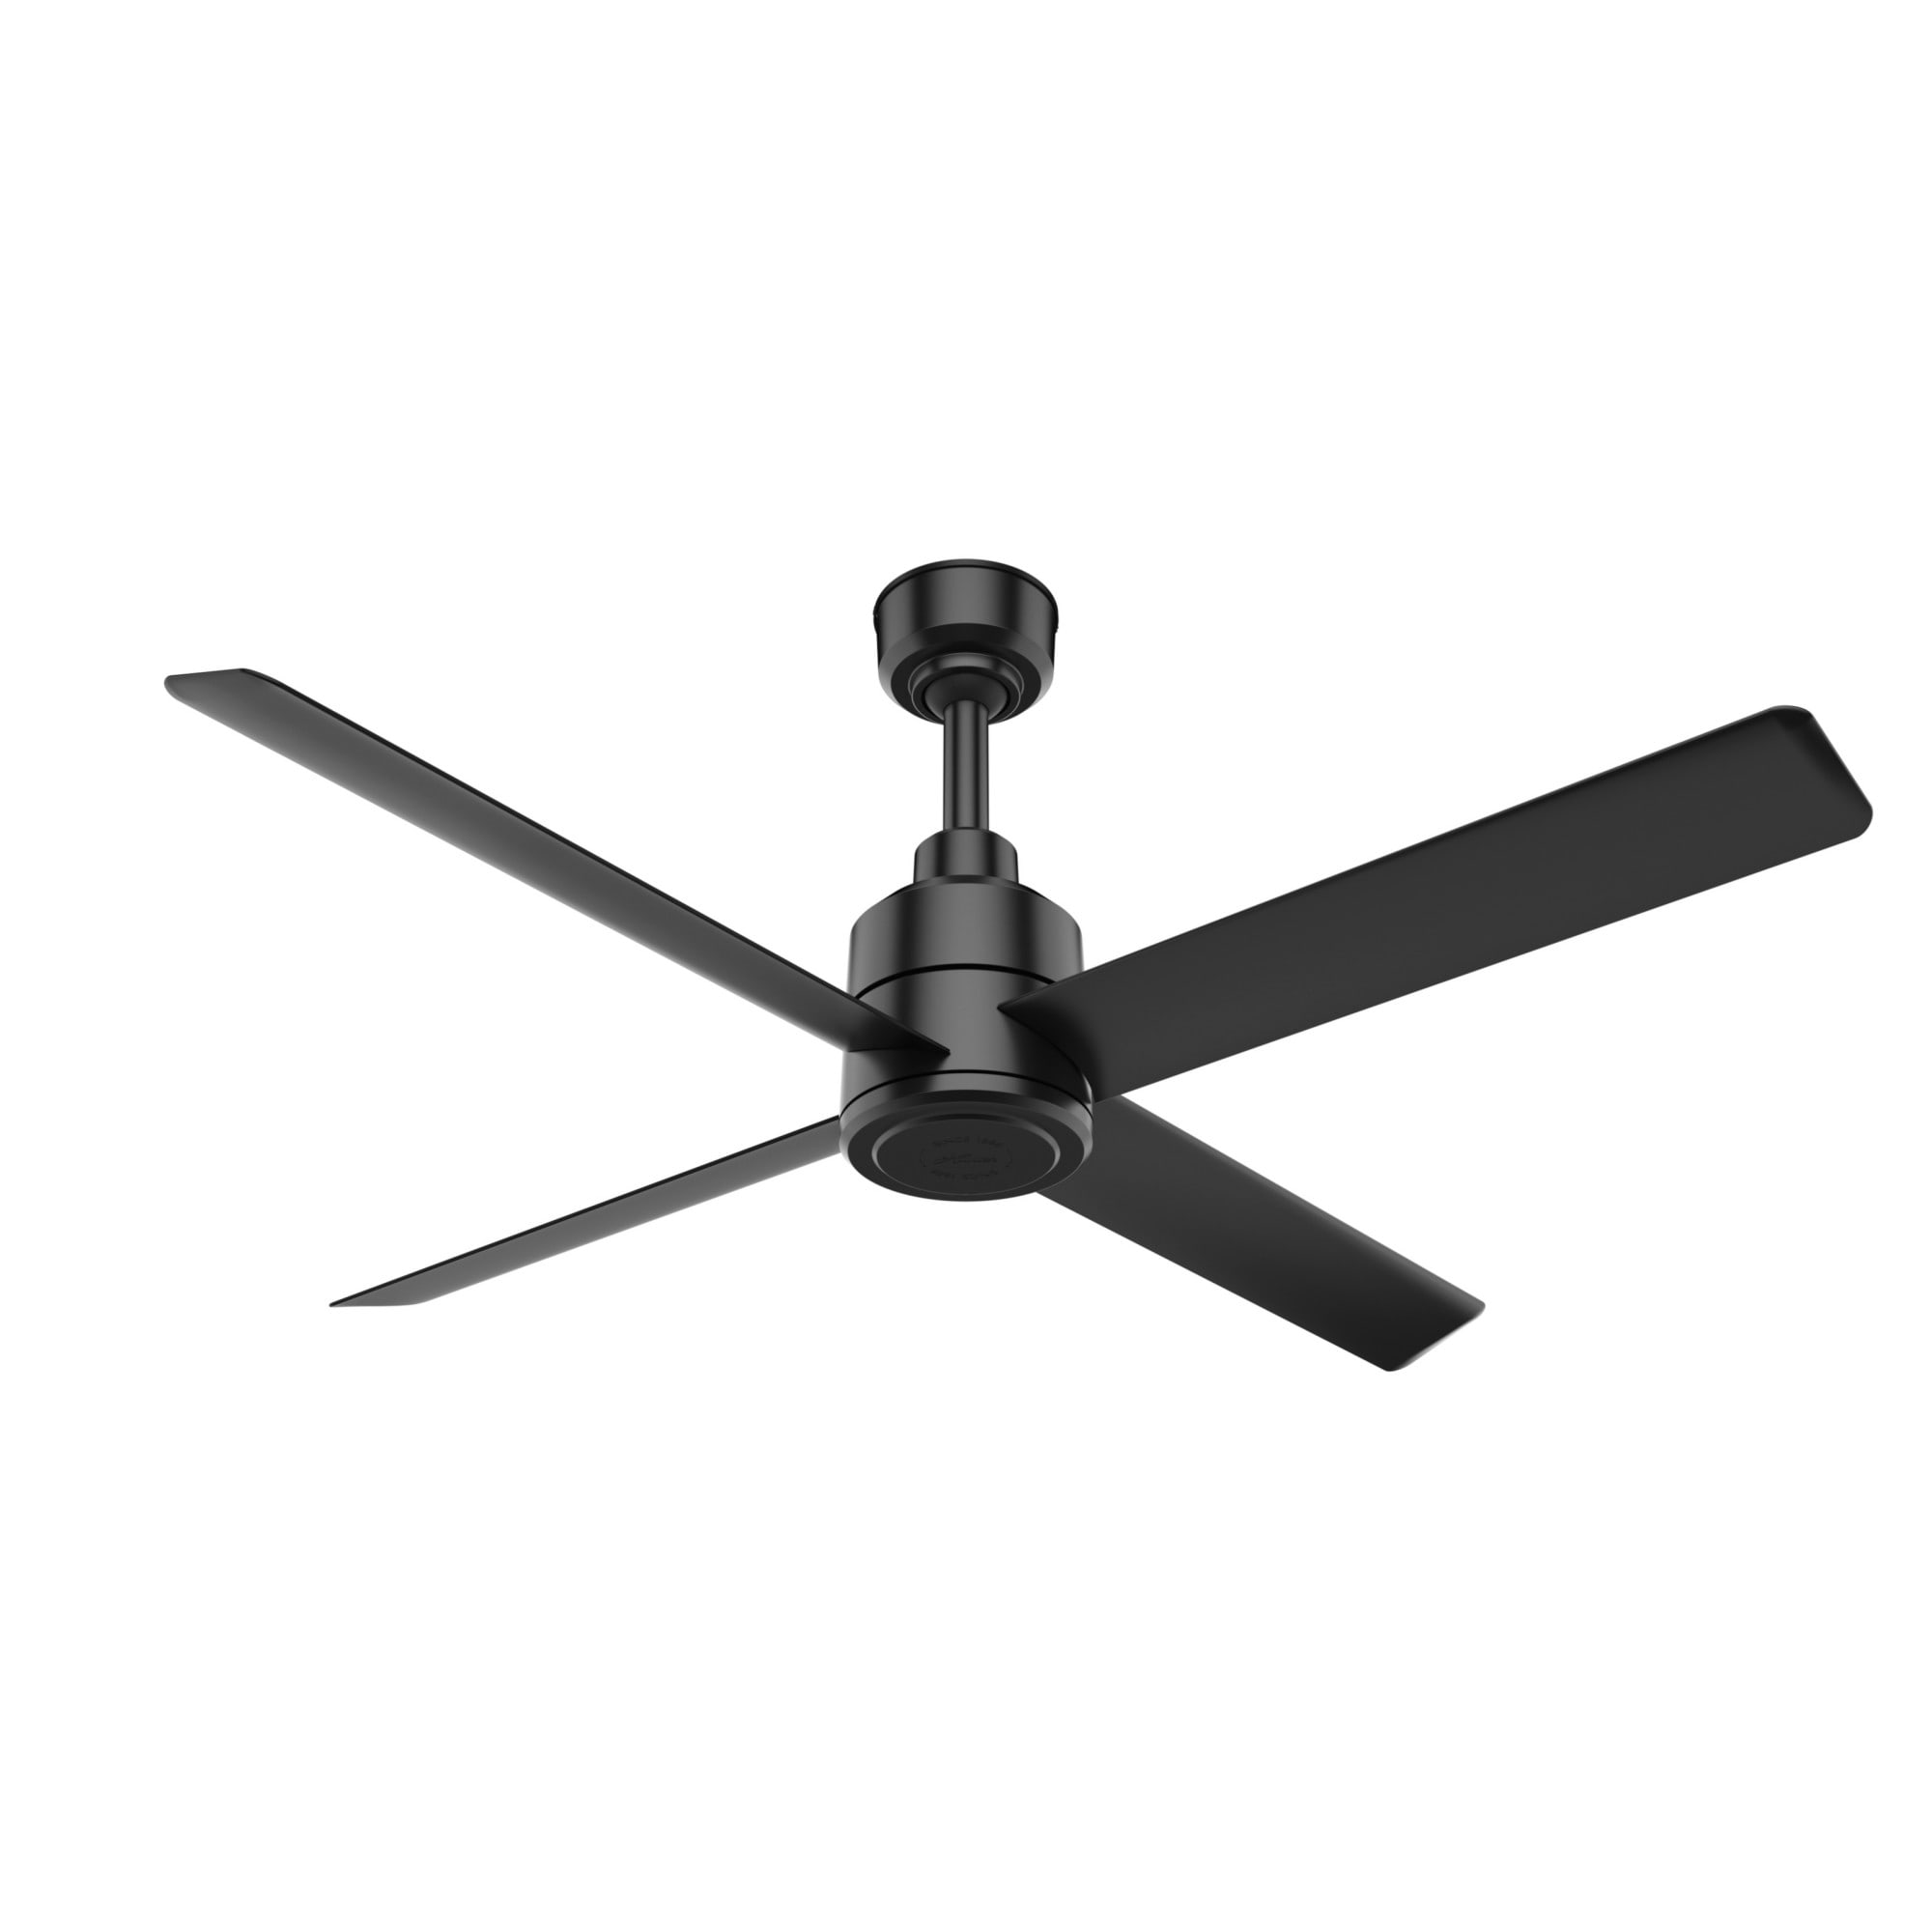 Blade Outdoor Led Ceiling Fan, Black Industrial Ceiling Fan With Remote Control